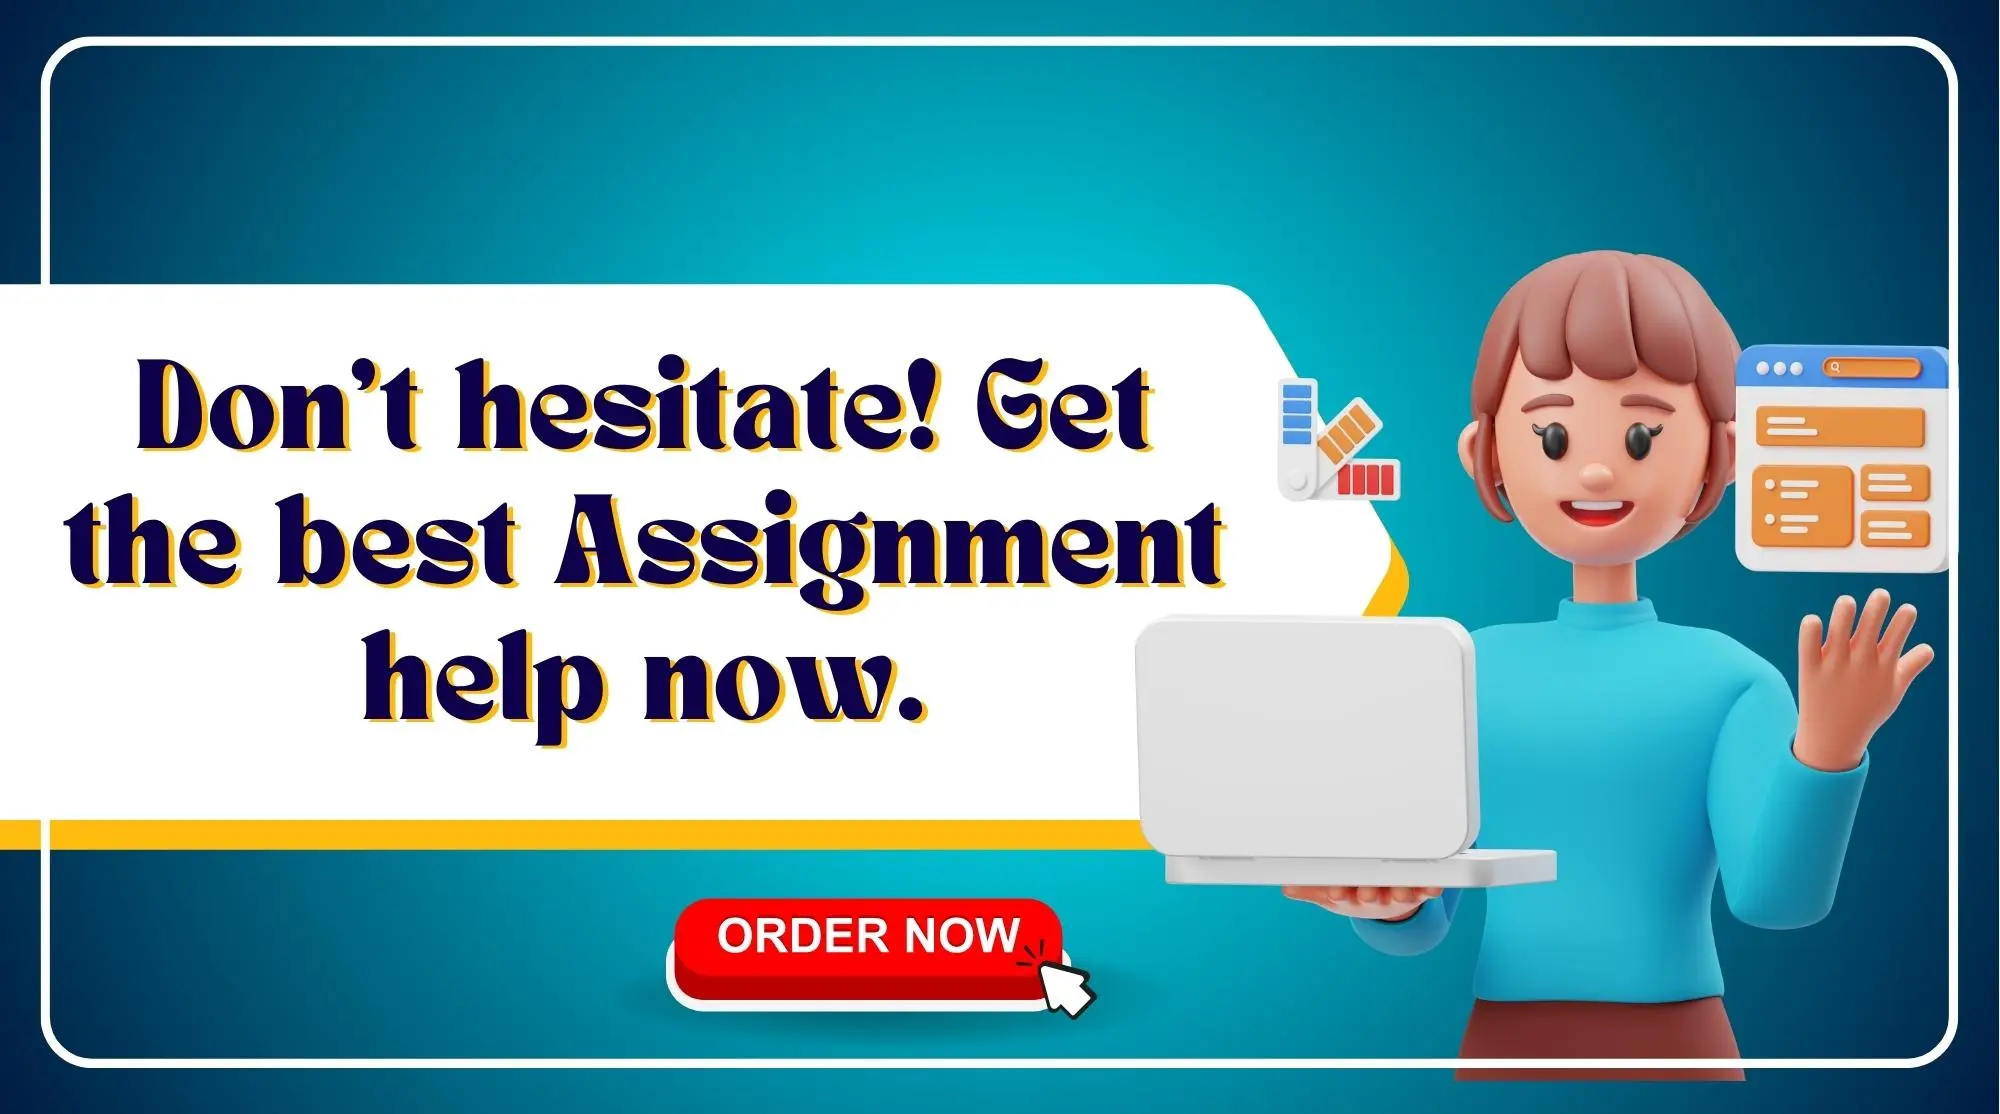 VAH - Online Assignment Services Provider Company in Australia - Order Now